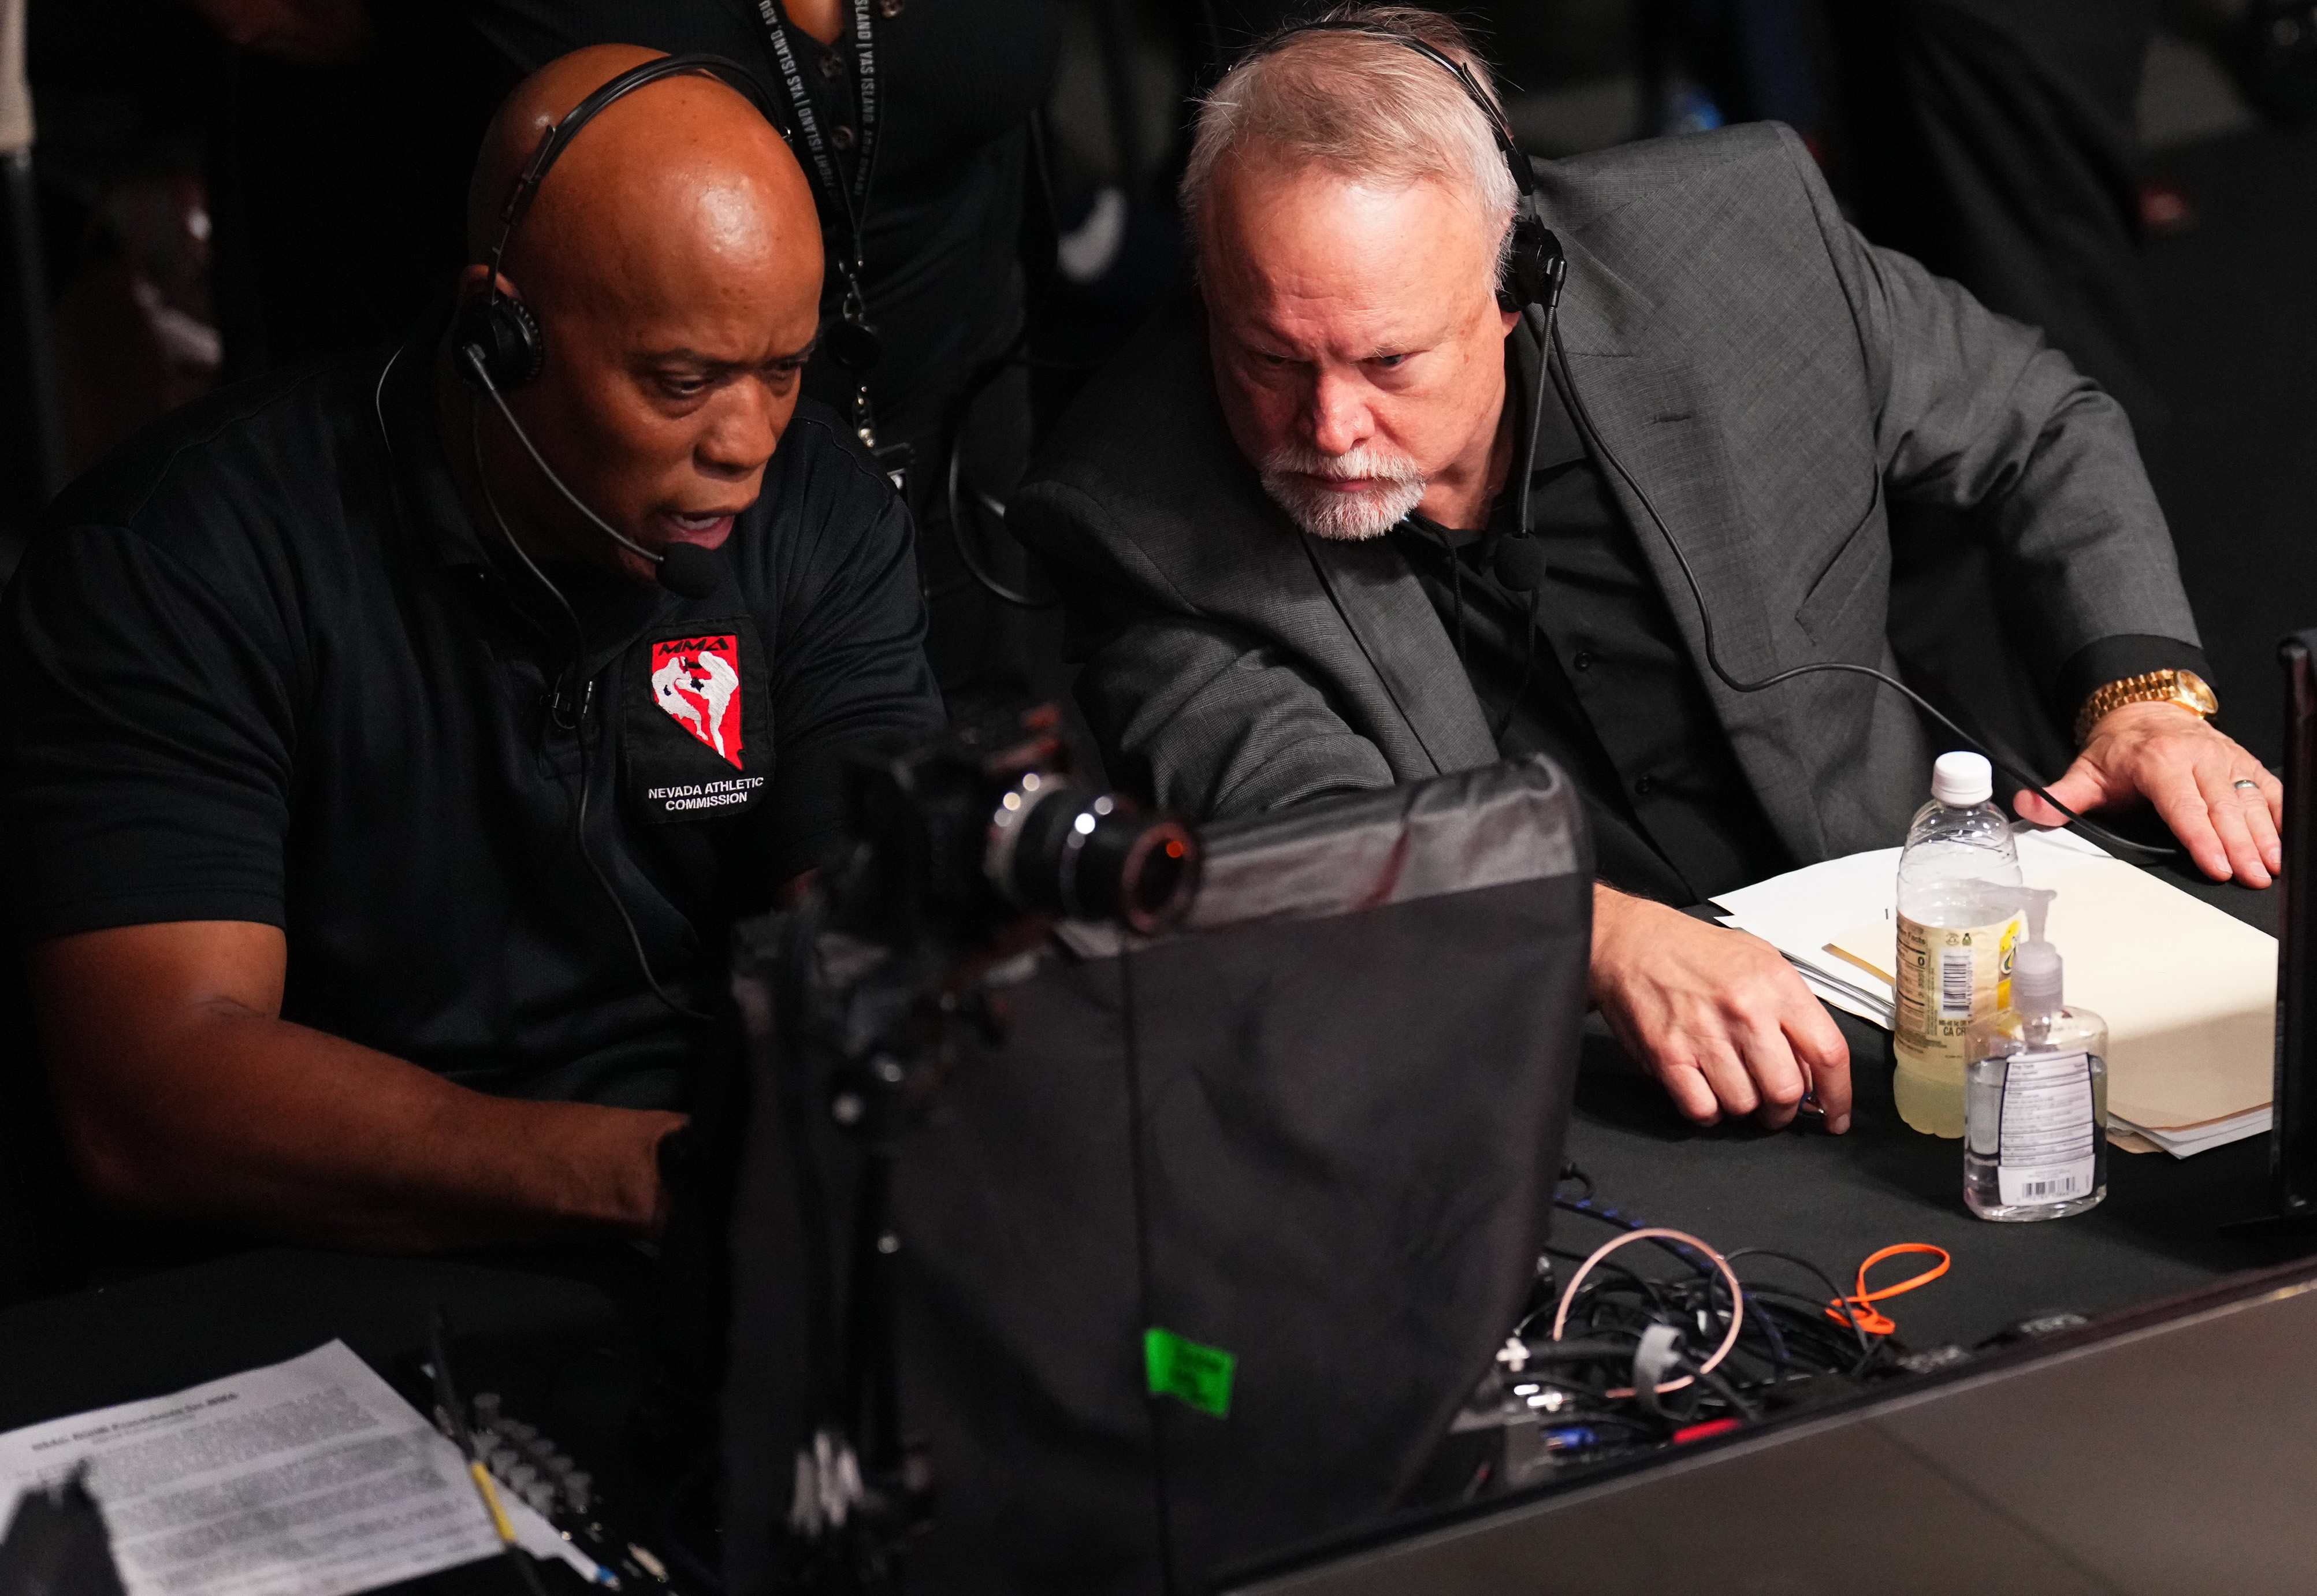 Nevada Athletic Commission director Jeff Mullen reviews a replay at a UFC event.